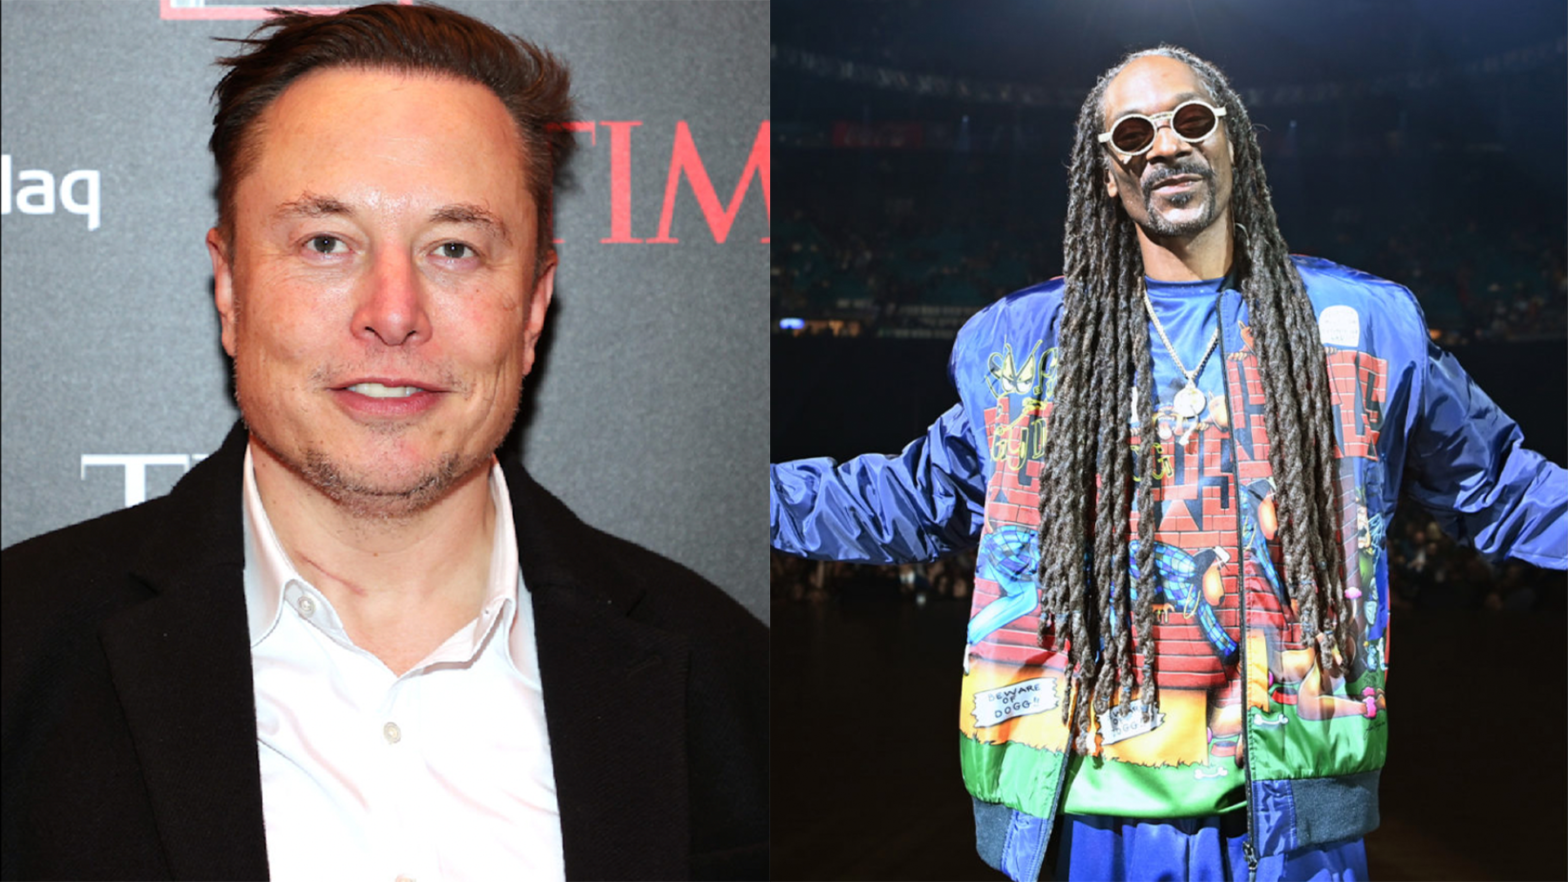 Elon Musks Asks If He Should Step Down From Twitter, Then Snoop Dogg Asks, 'Should I Run Twitter?'